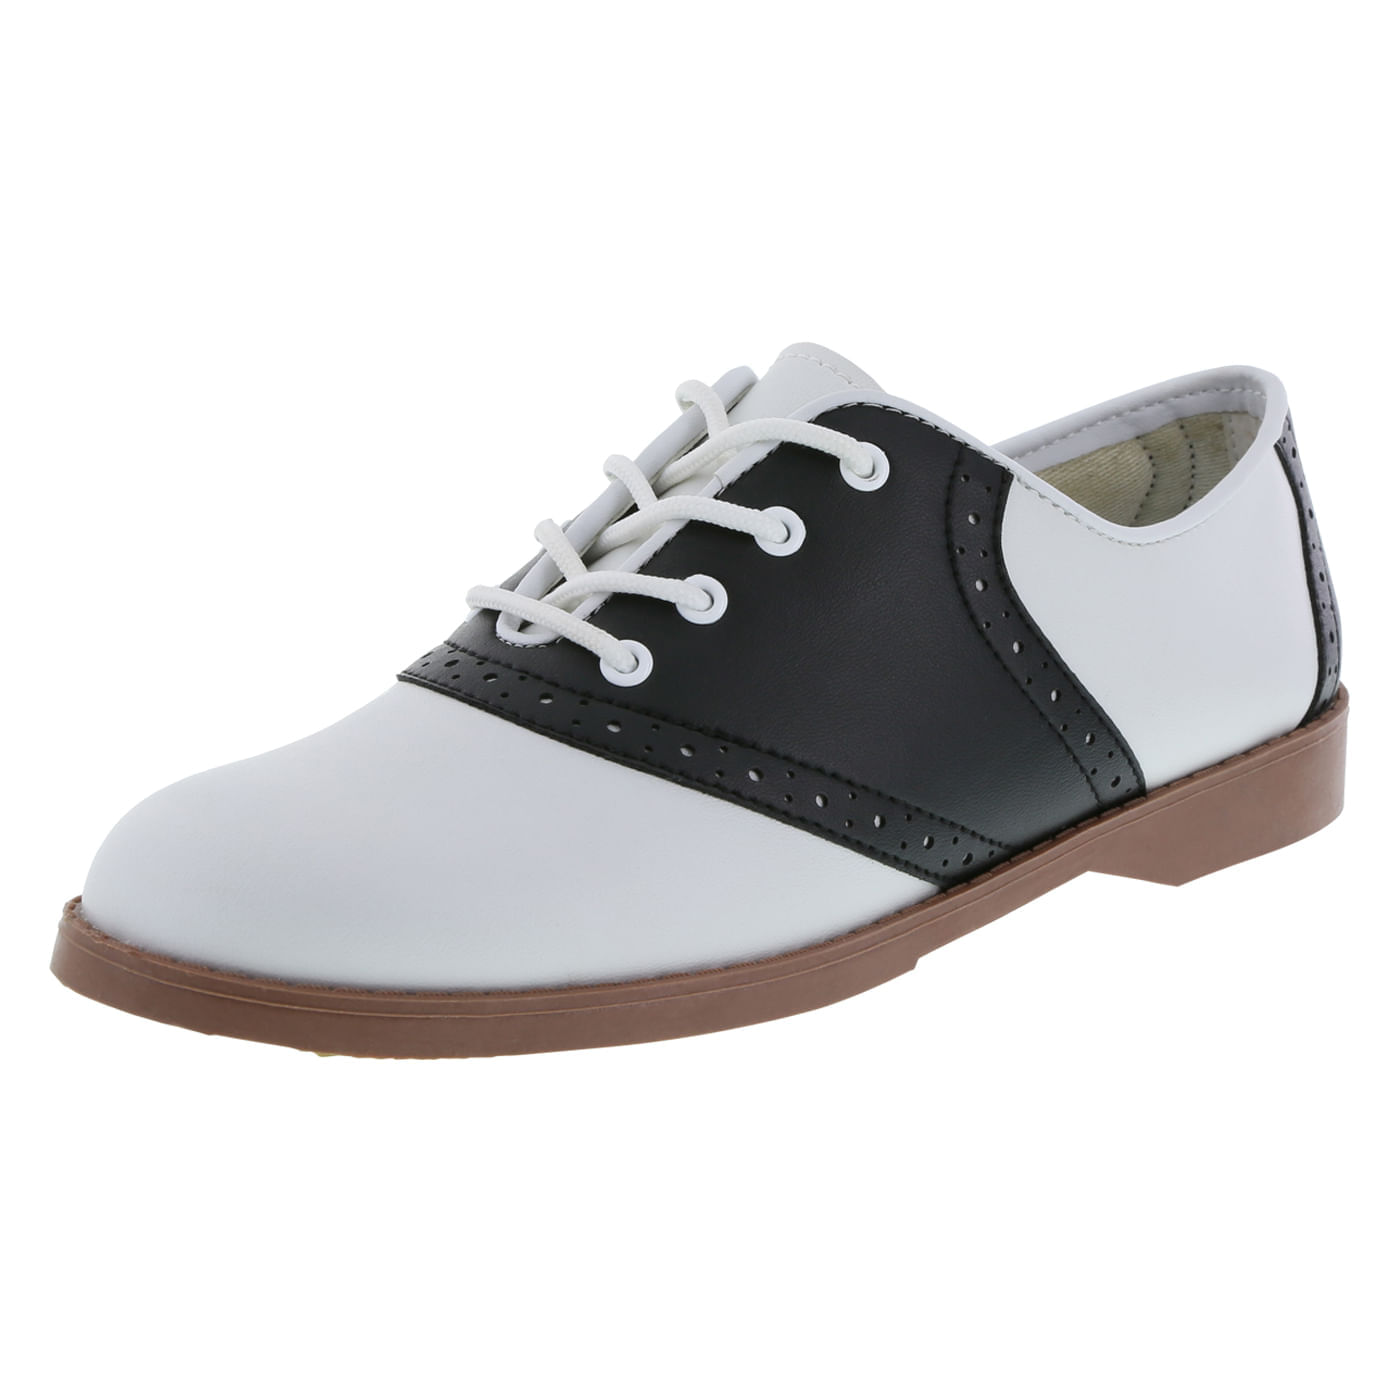 SCHOOL ISSUE Womens Saddle Oxford